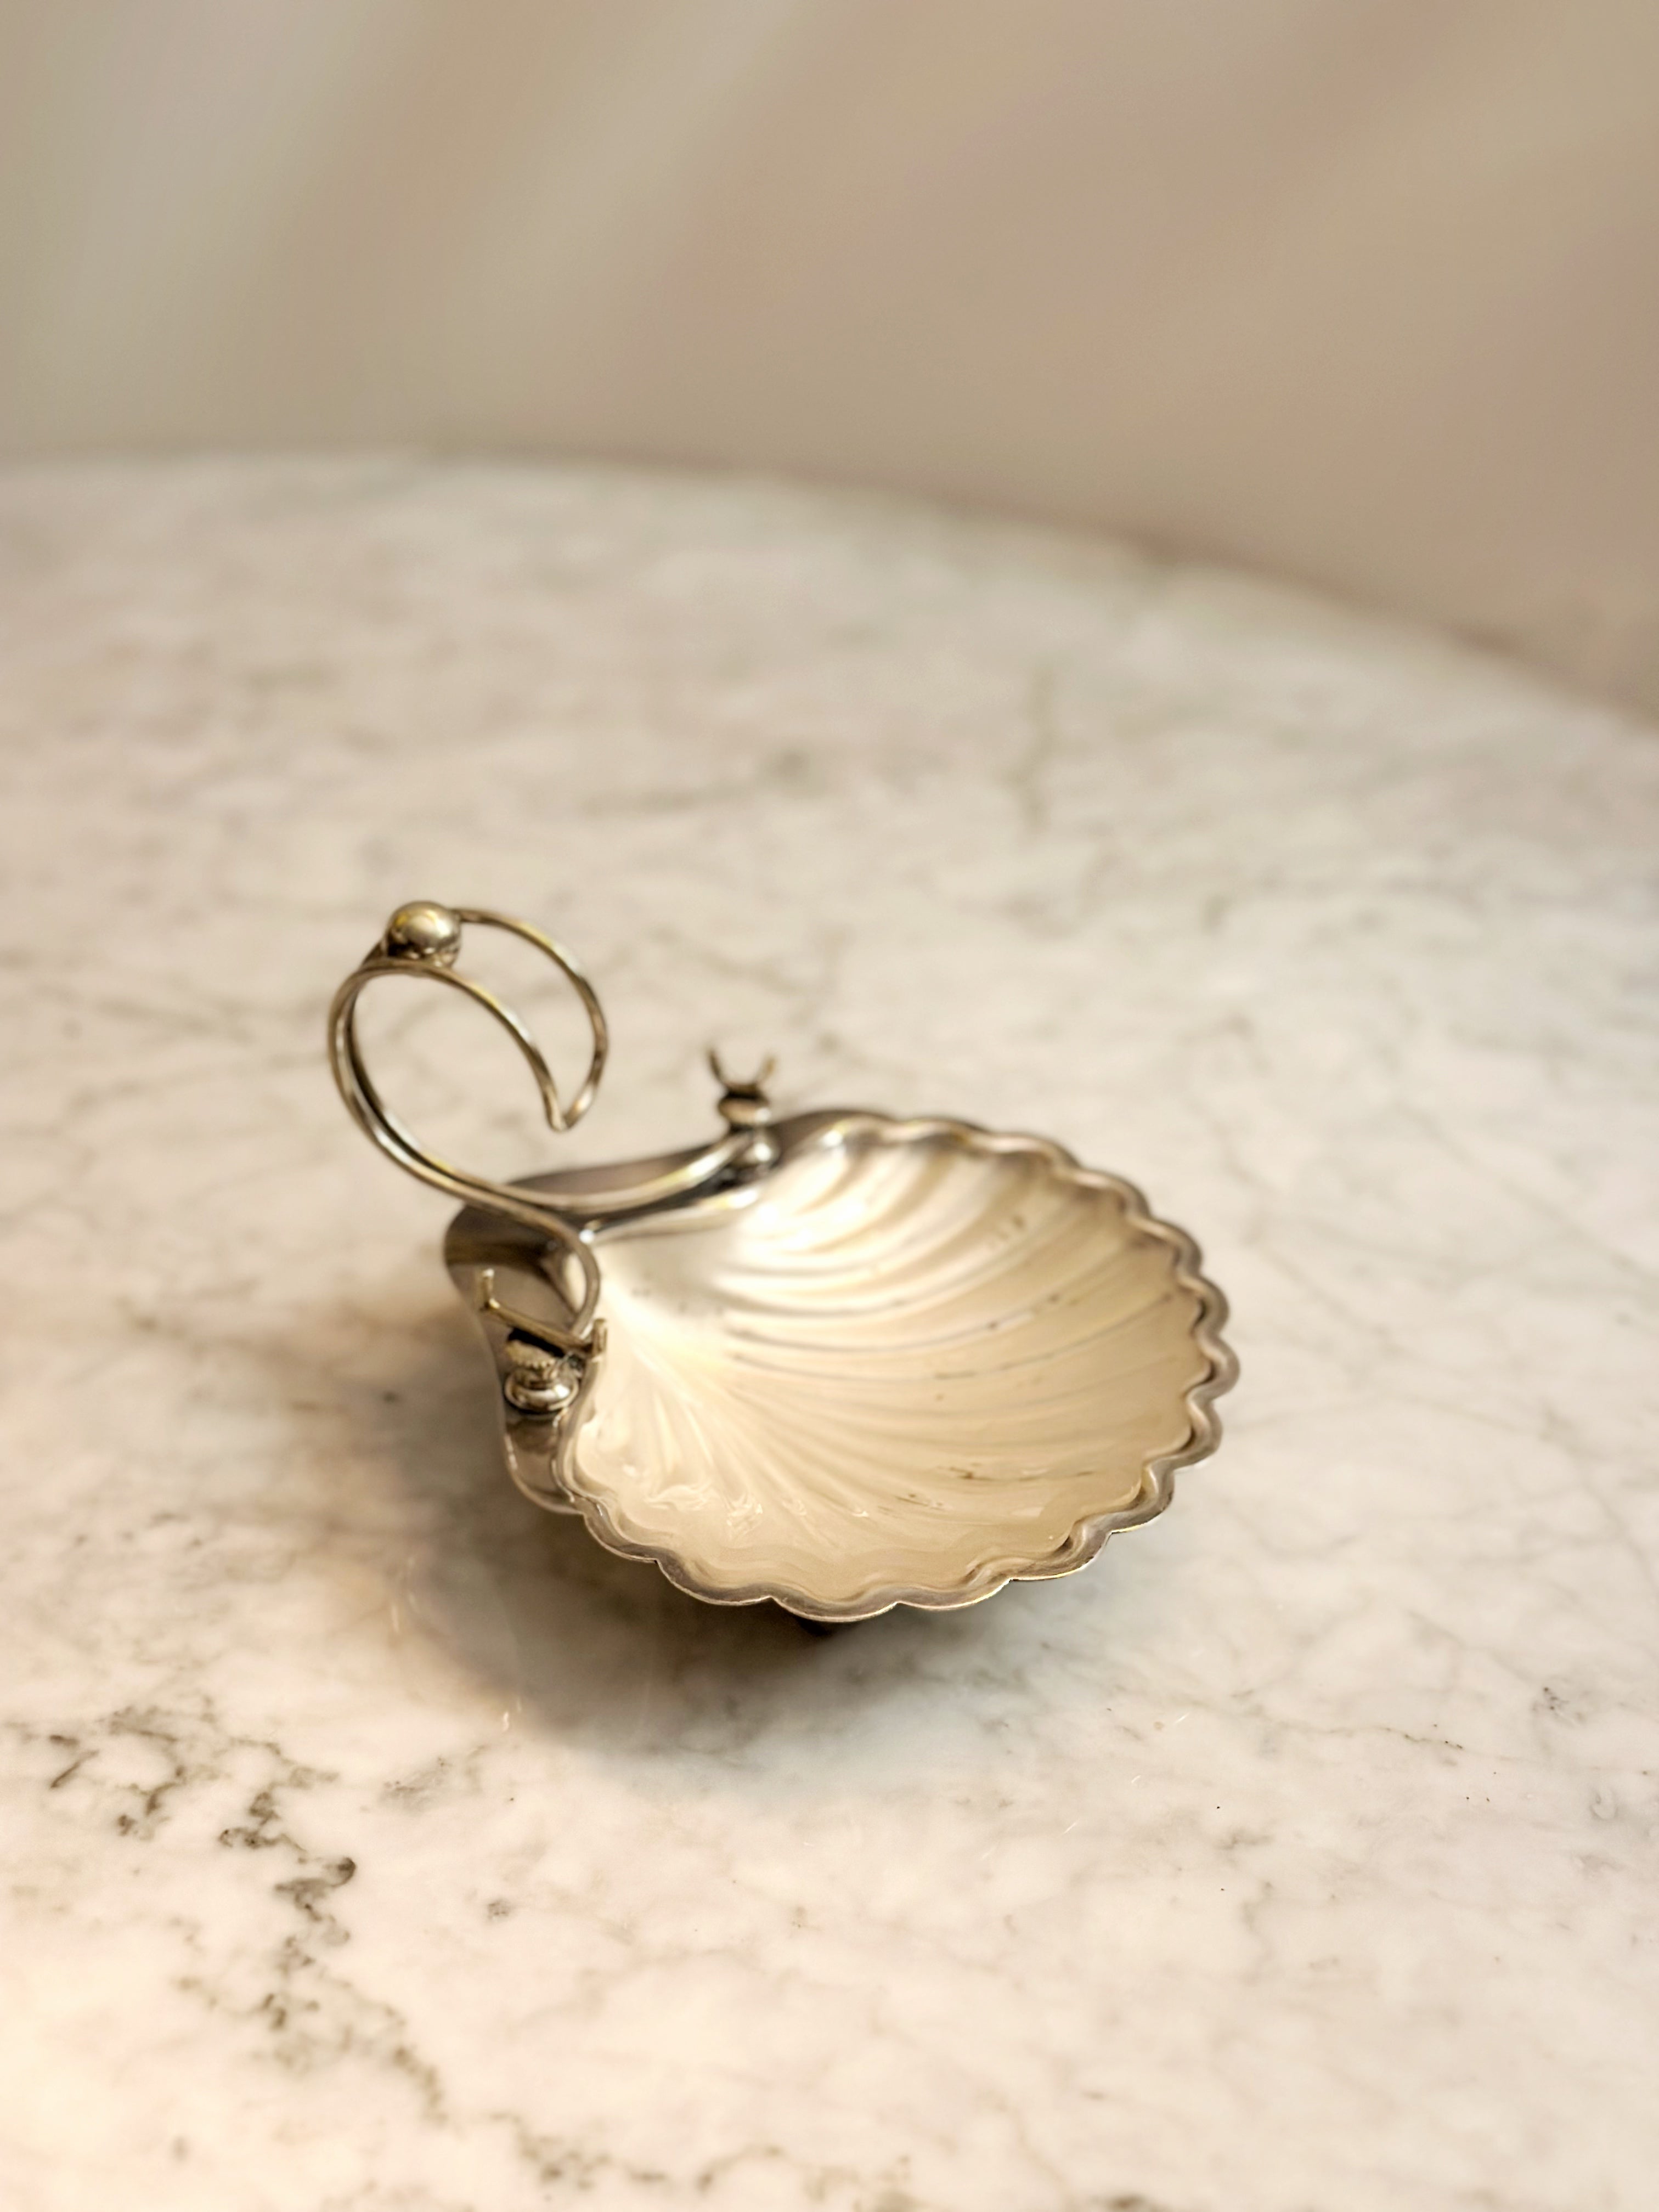 Vintage Scallop Shell Caviar or Butter Dish